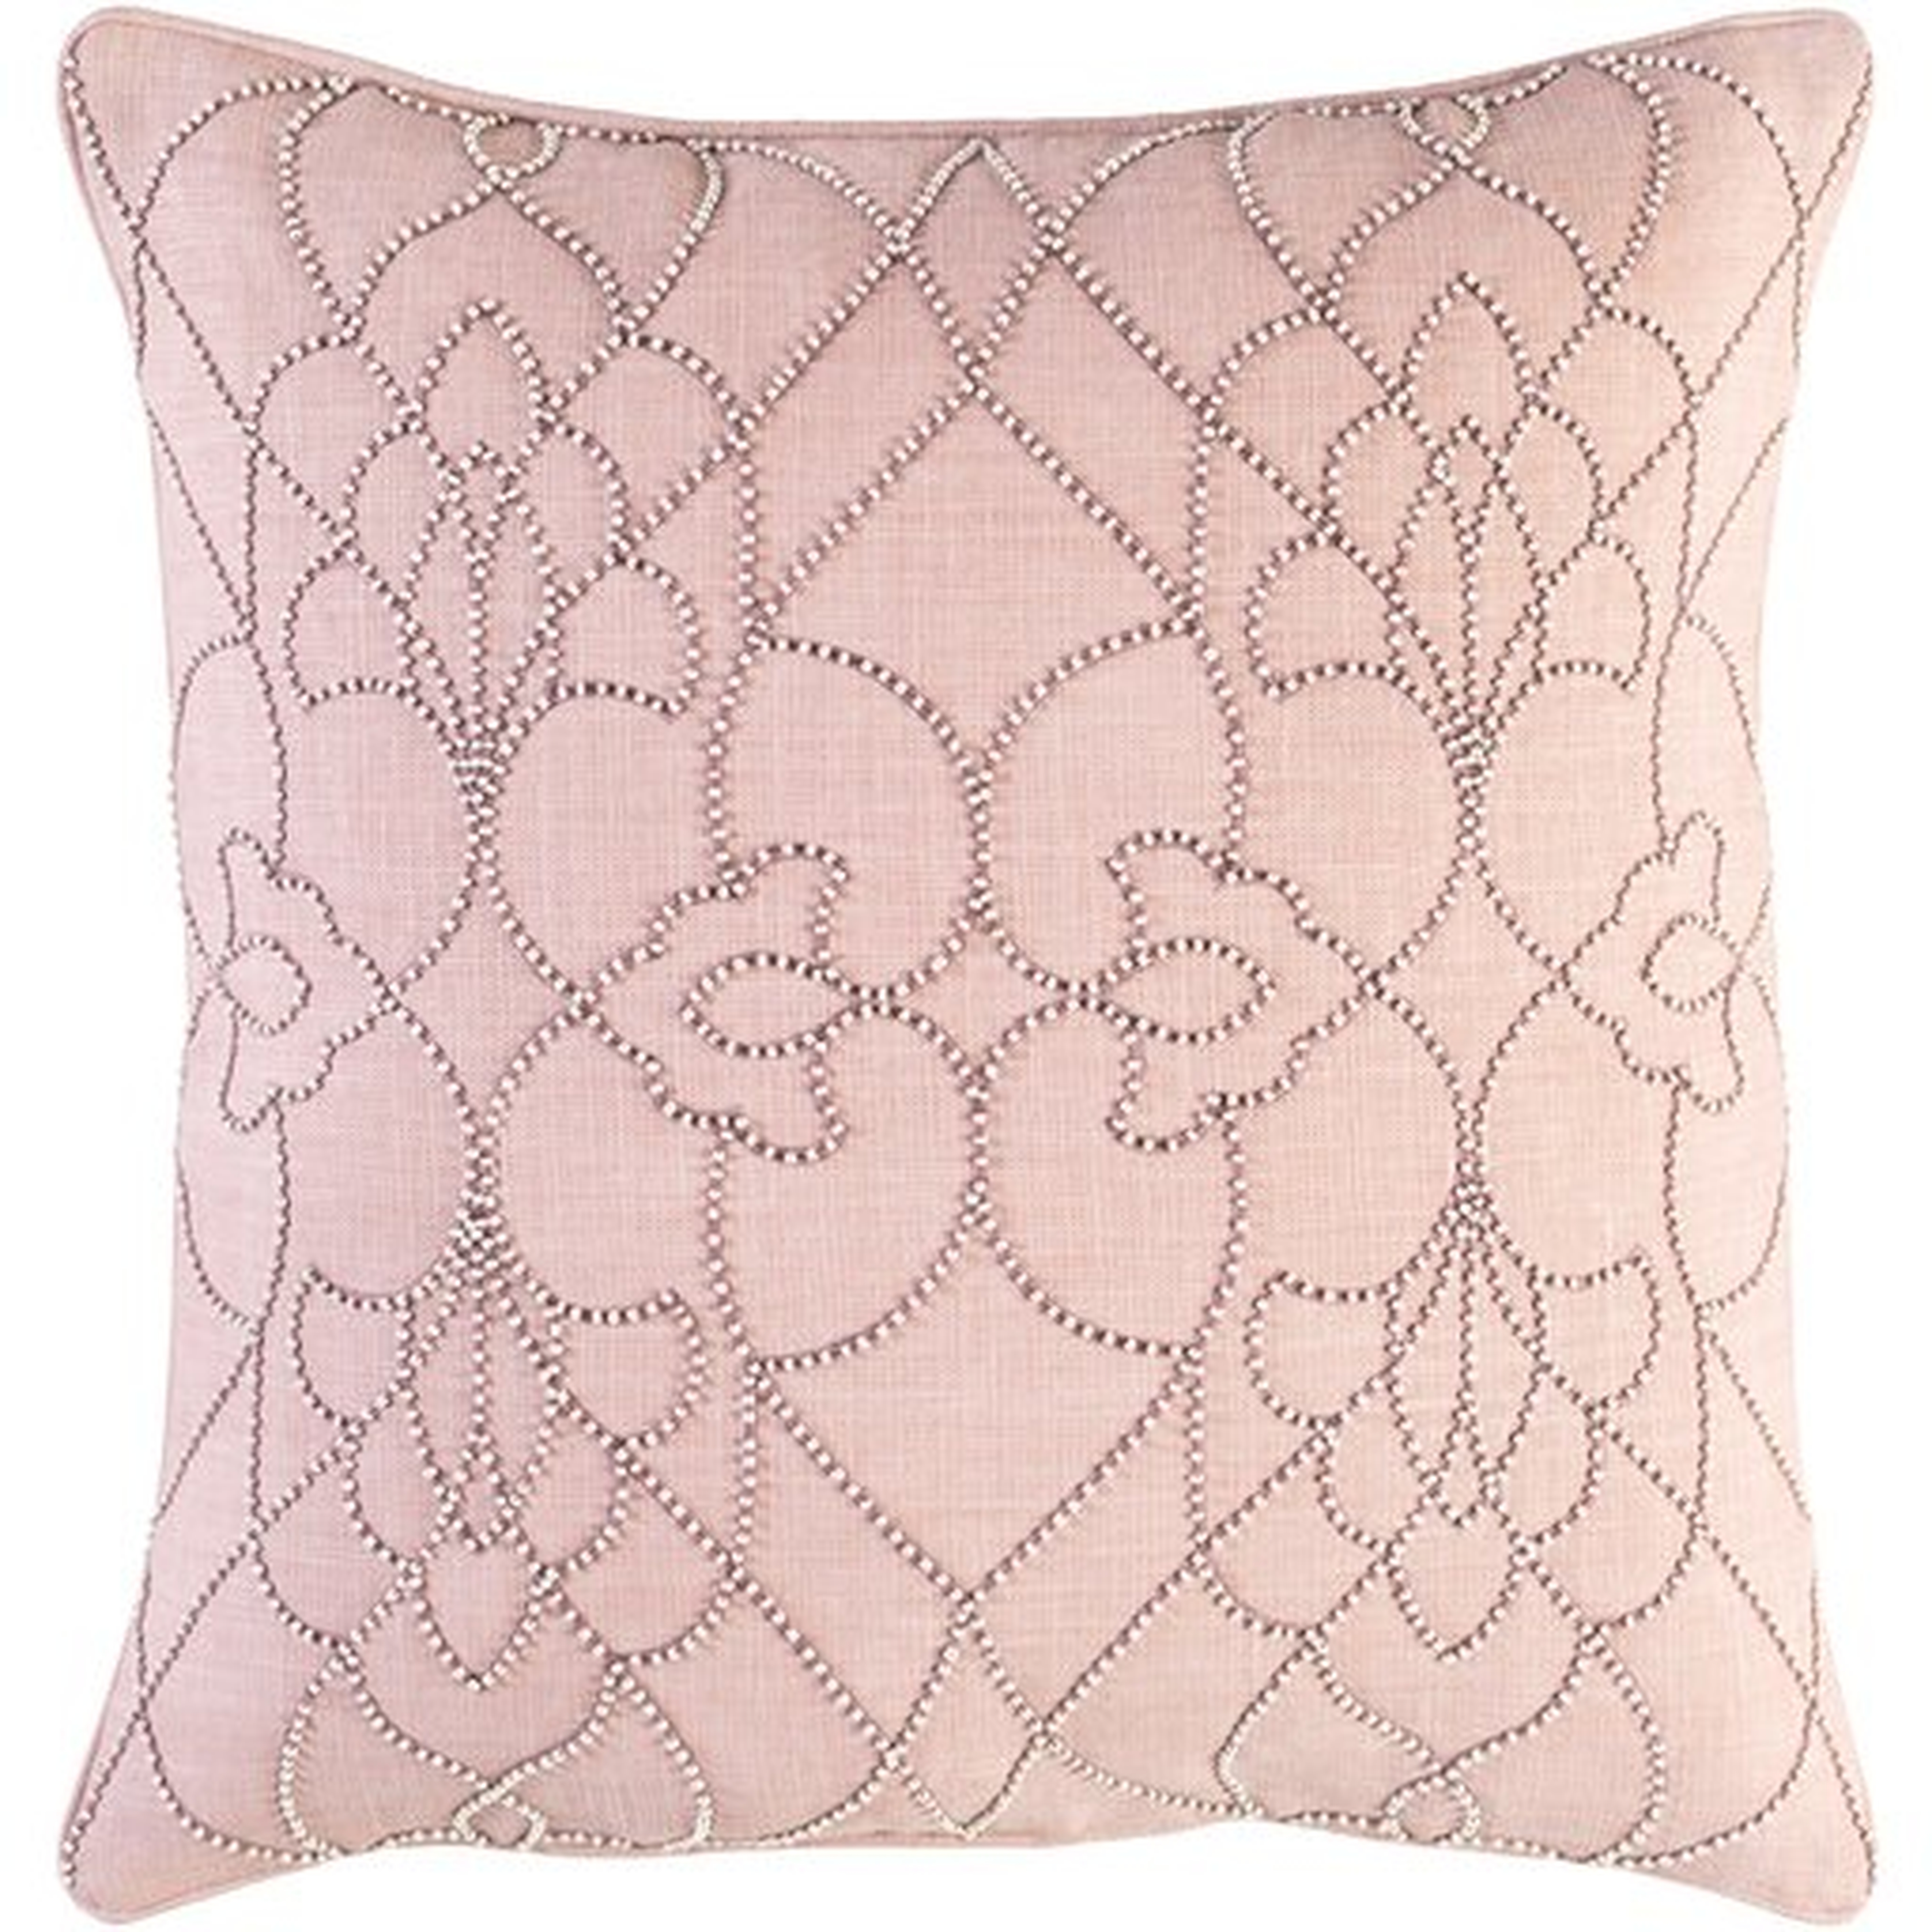 Dotted Pirouette Throw Pillow, 18" x 18", with down insert - Surya